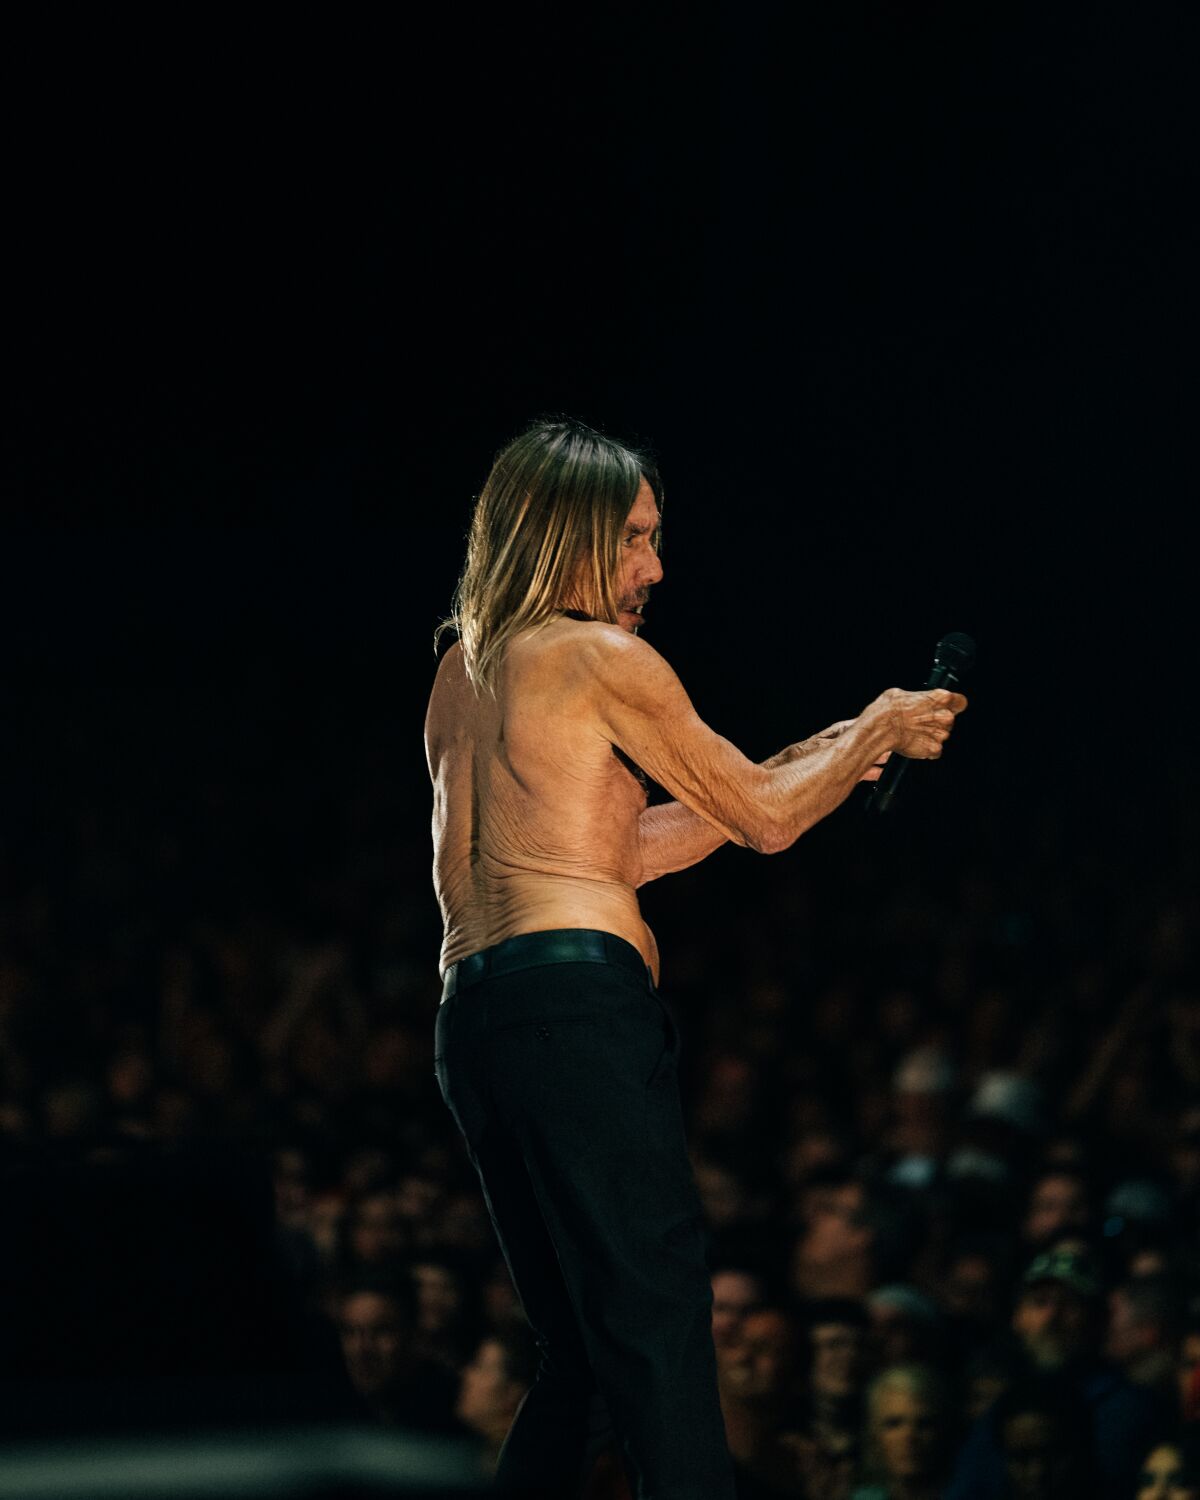 A shirtless man with long hair performs onstage before a crowd.